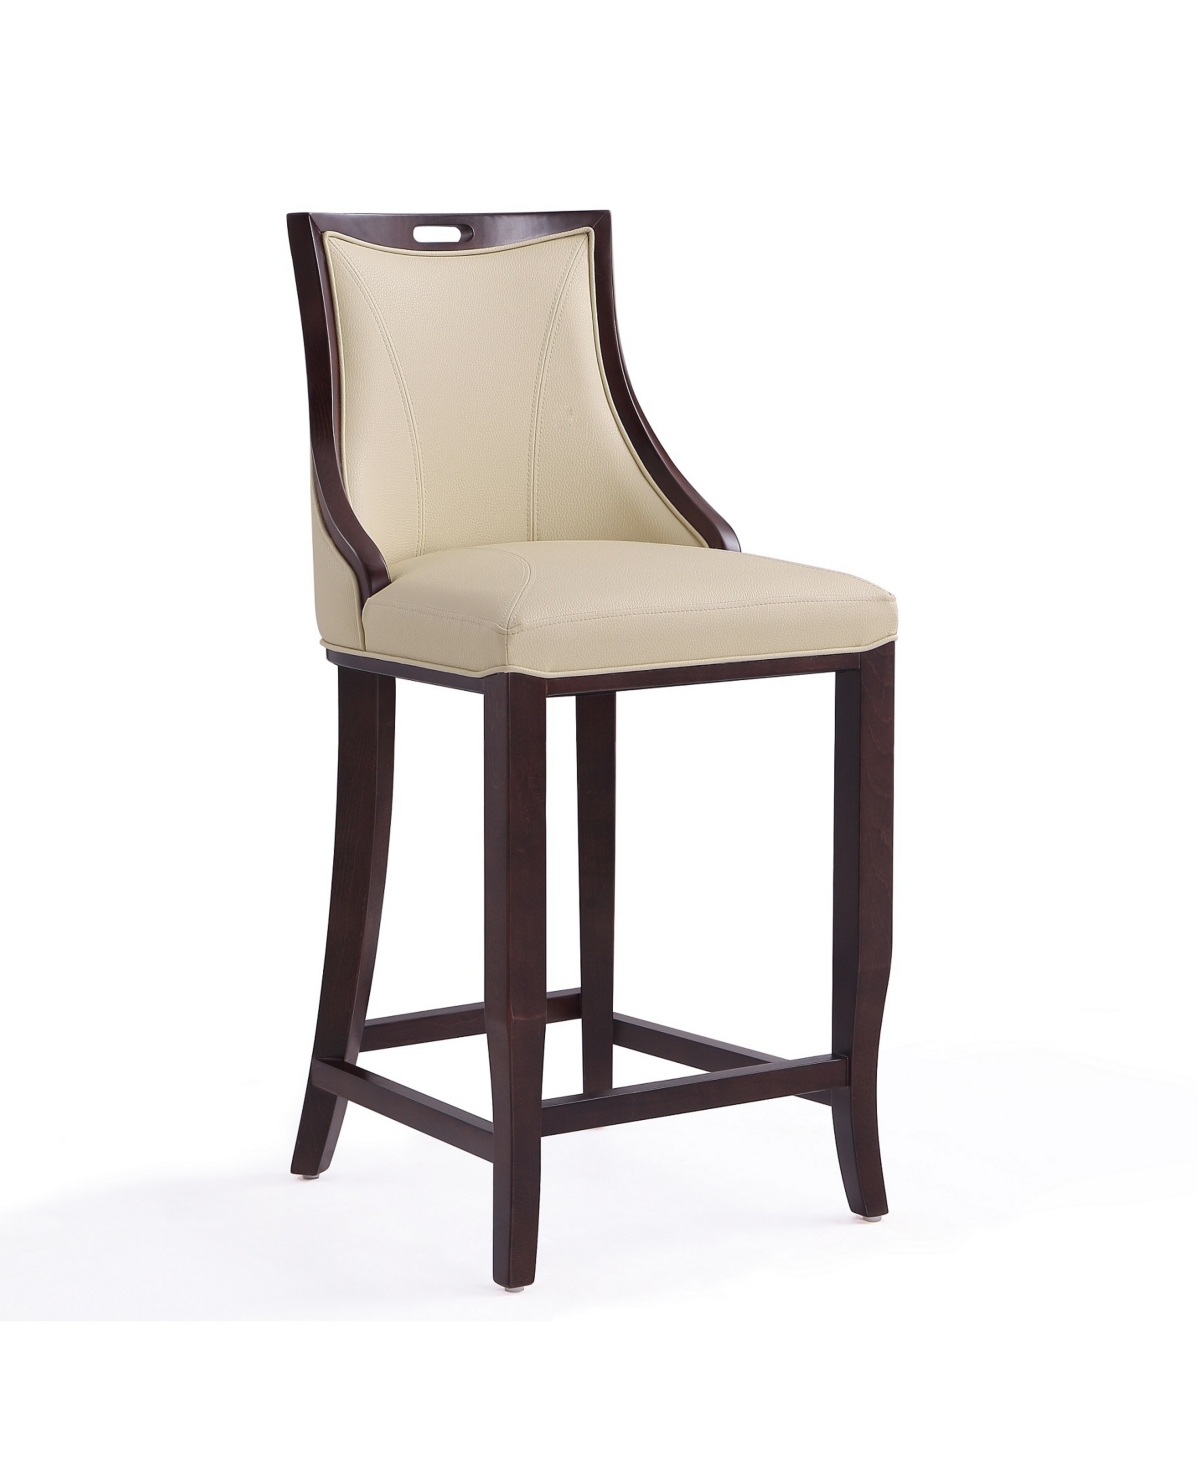 Manhattan Comfort Emperor 19" L Beech Wood Faux Leather Upholstered Barstool In Cream,walnut